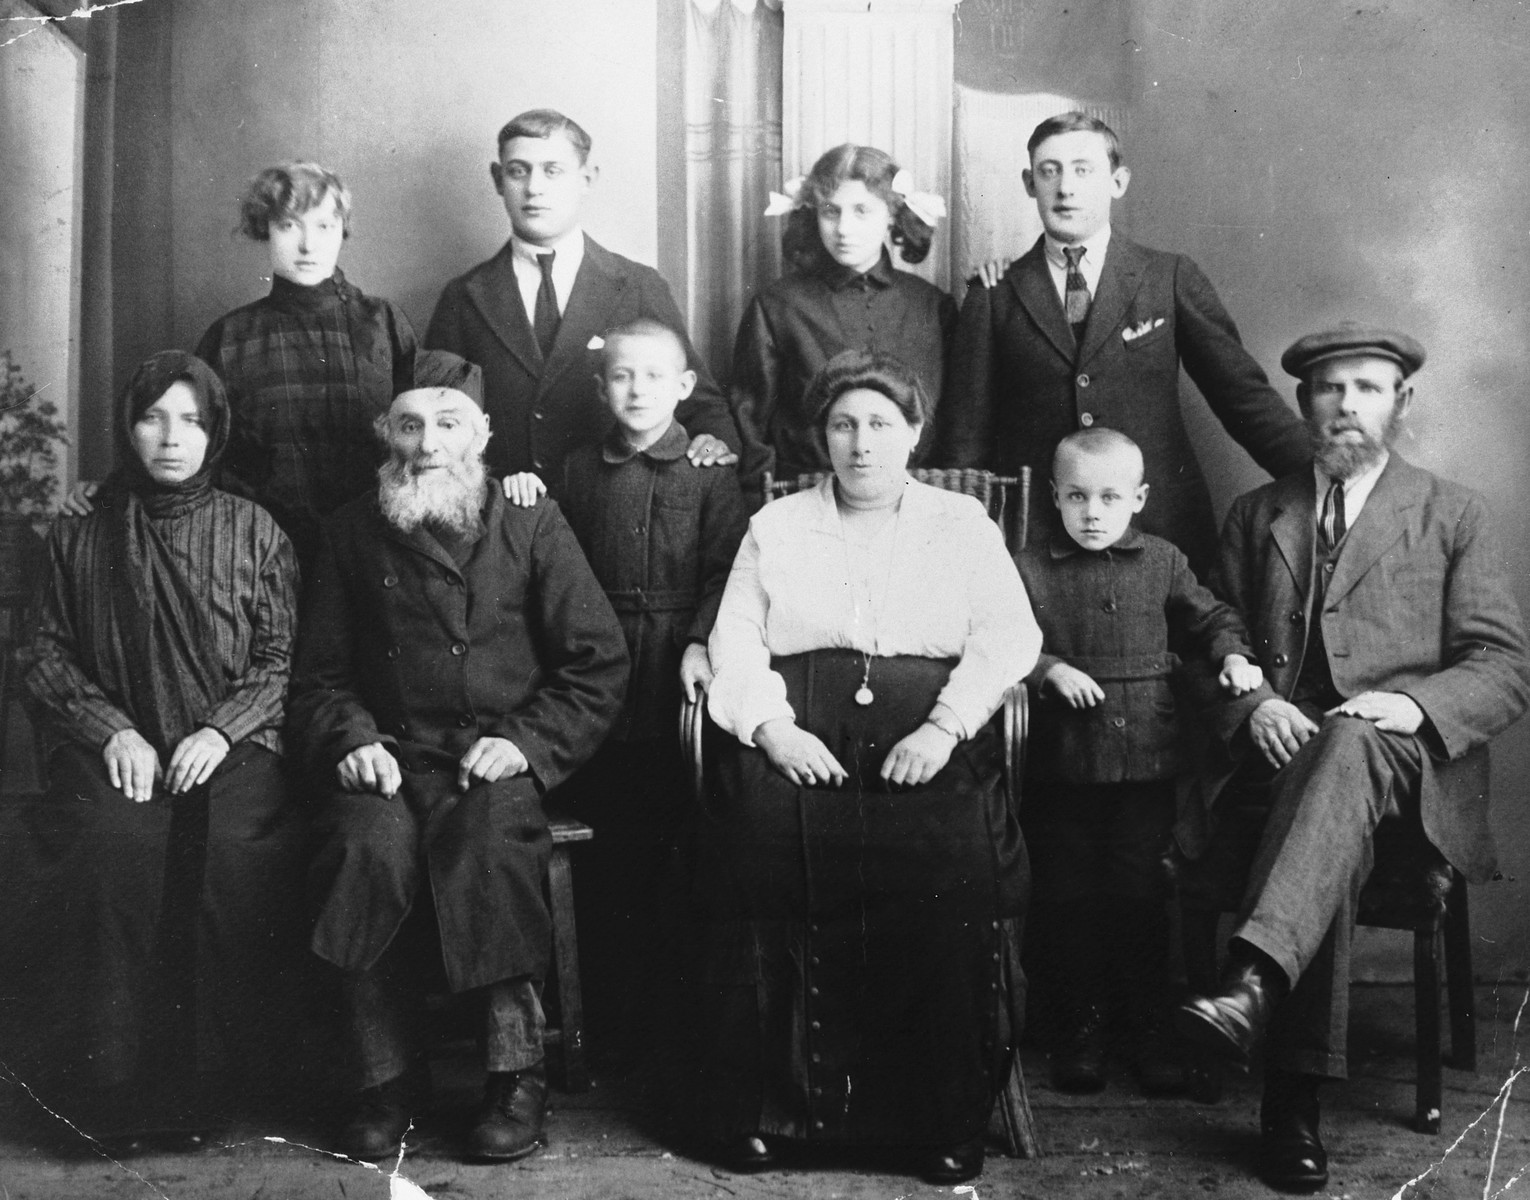 Studio portrait of the extended Fleisher family of Kursenai Lithuania.

Front left to right: great-aunt of the donor, Grandfather Shmoel-Hirsh, Reuven-Leib, Tame-Dvora (mother of donor), Yehezkel and Shlomo David Fleisher (father of donor).  Back row: Batia Michaele, Zalman Lezer, Esther Raize and Haim Ber Fleisher.